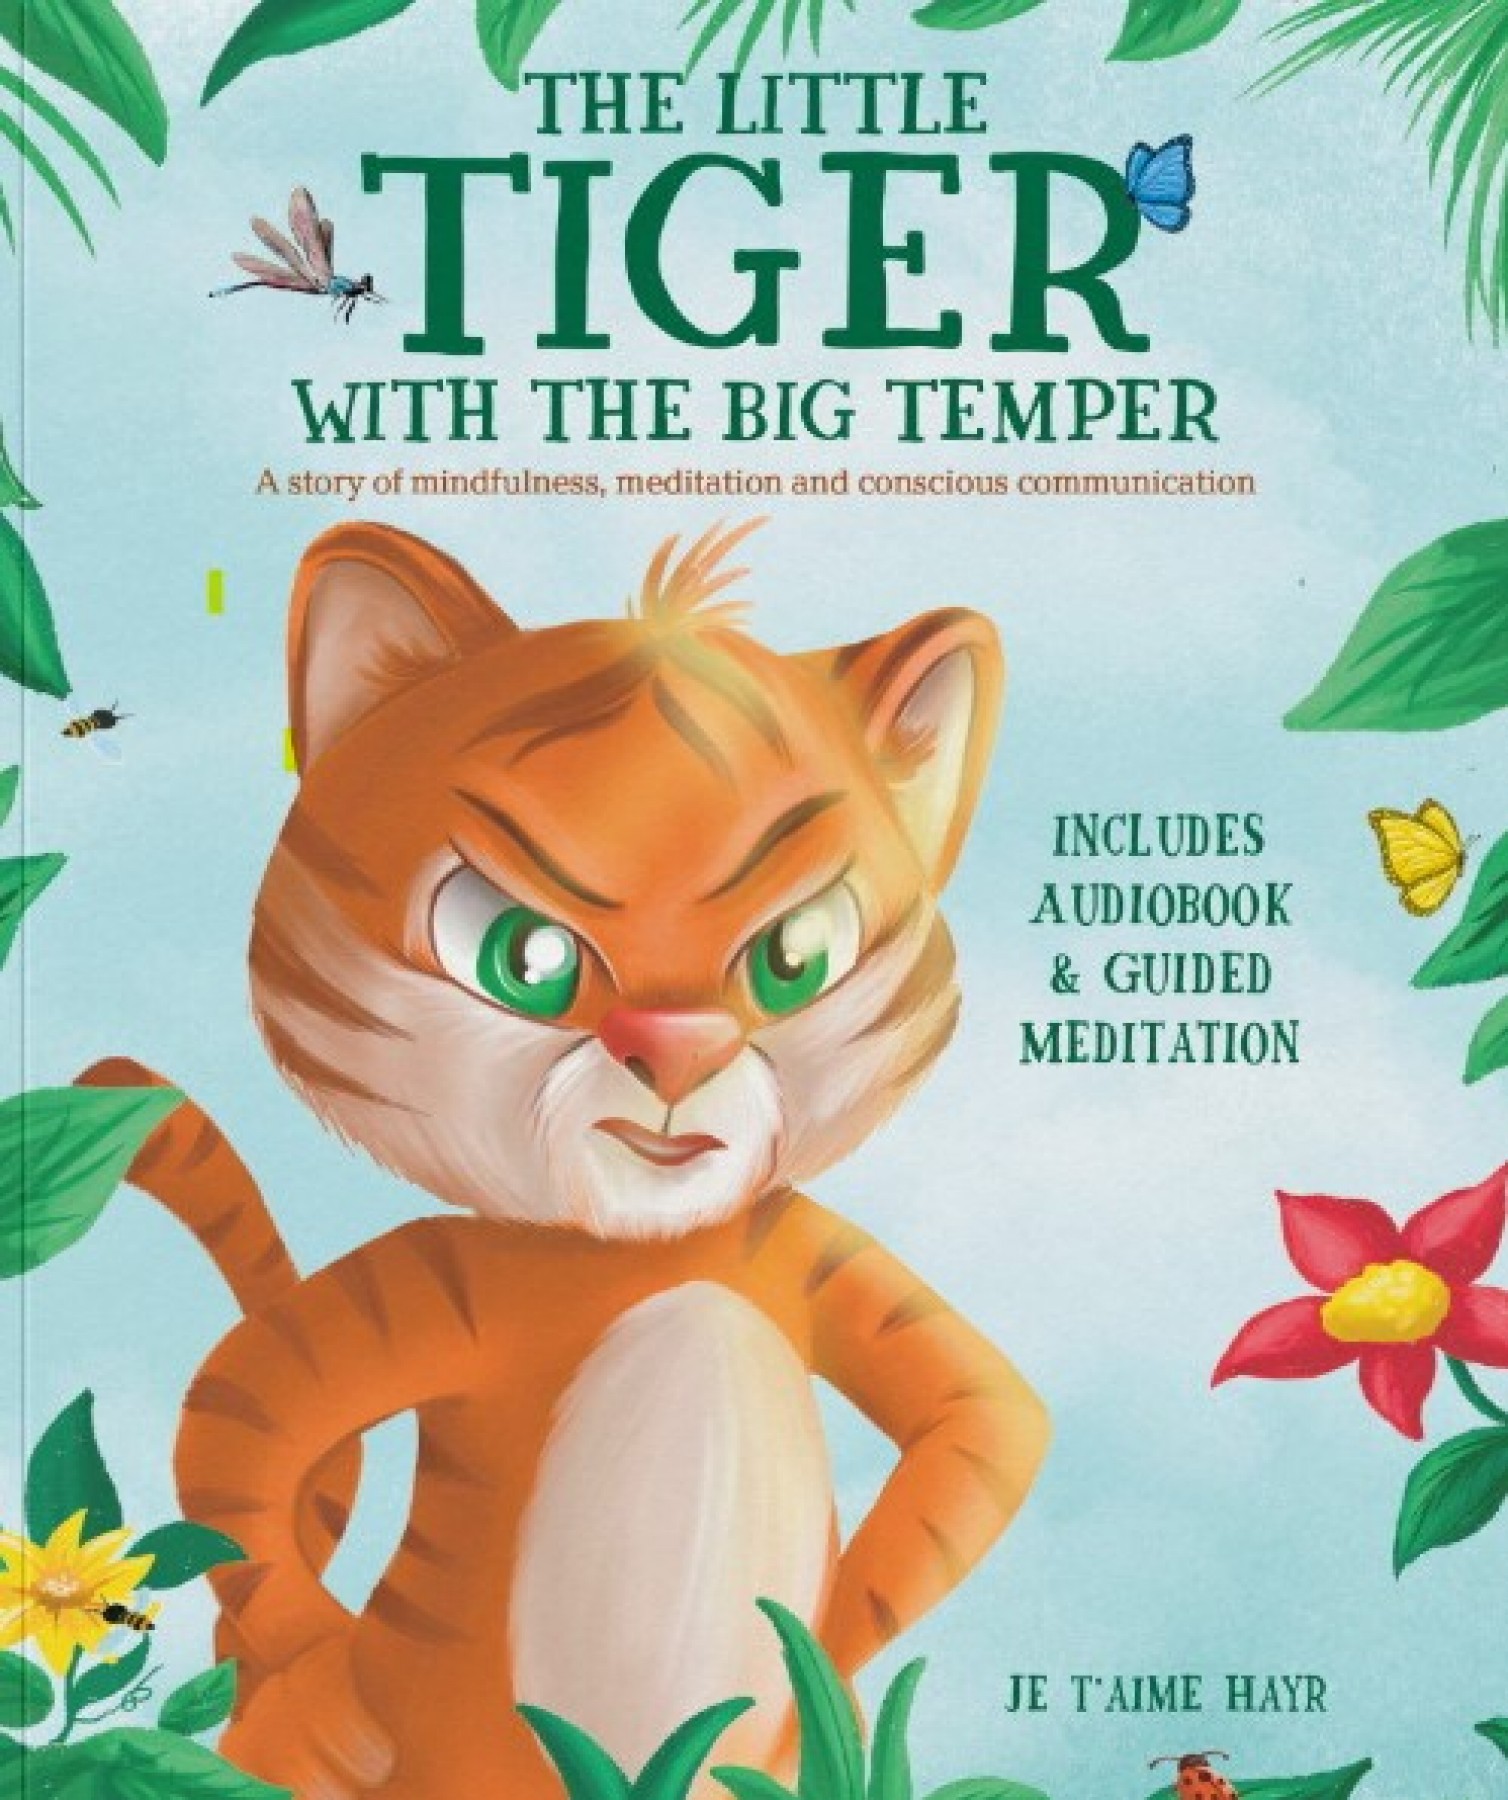 The little tiger with the big temper: A story of mindfulness, meditation and conscious communication